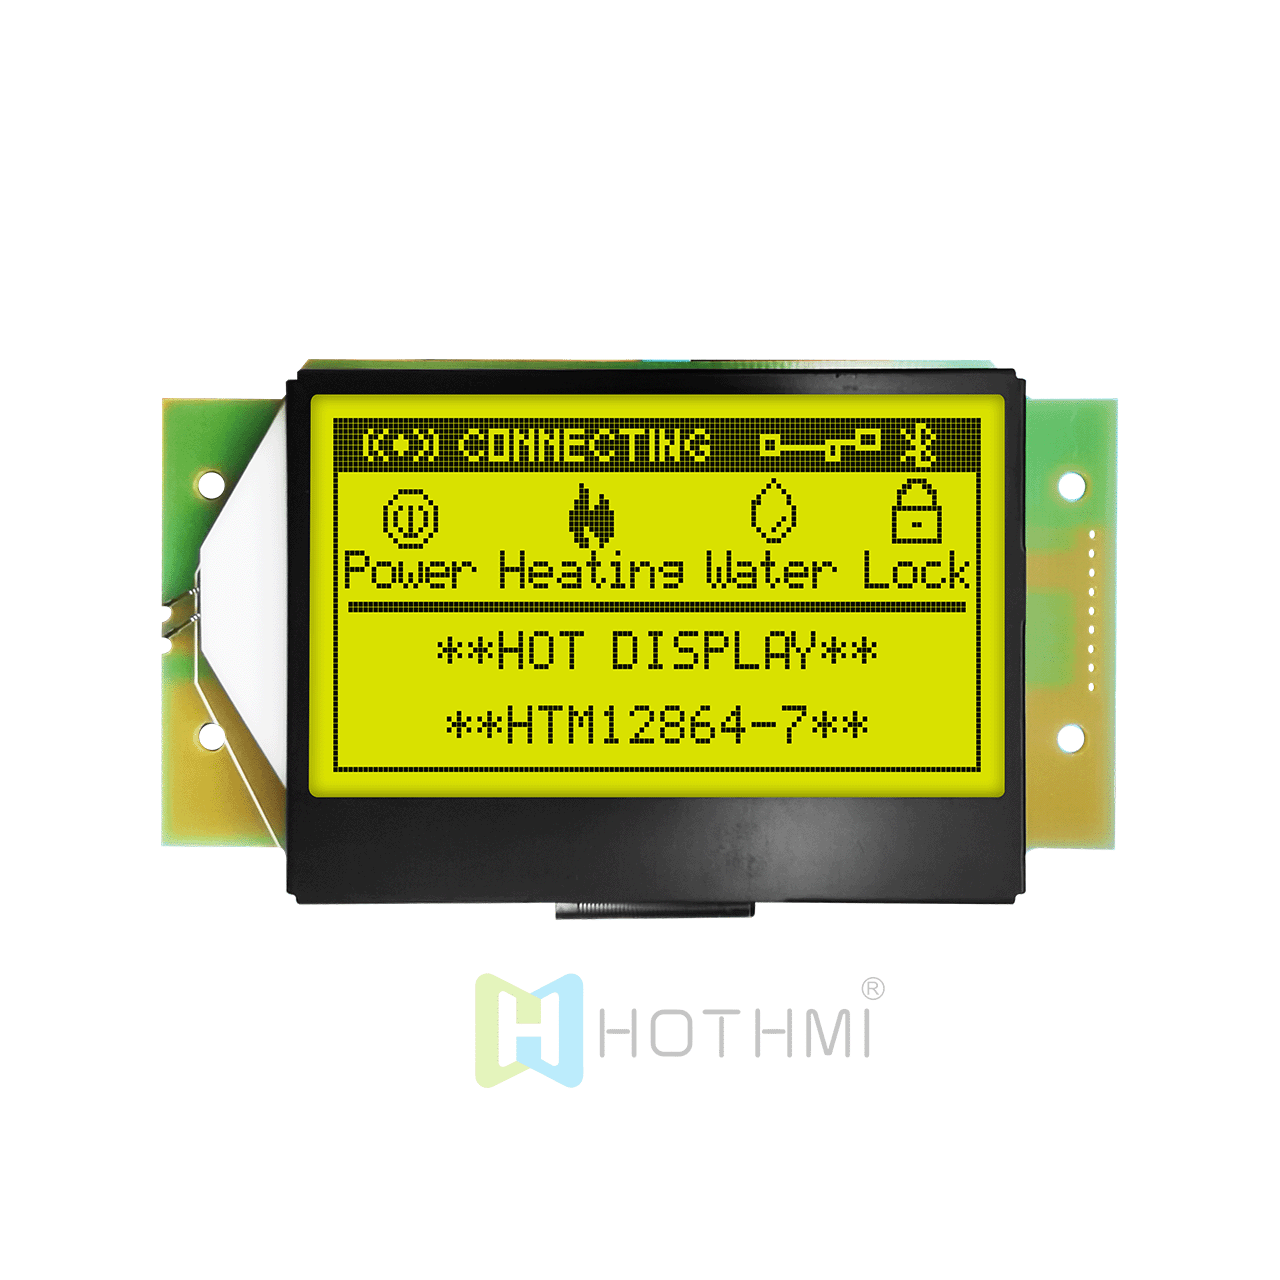 3.0-inch graphic LCD module | 128x64 graphic display LCD module | STN+ yellow-green backlight | 5.0V | ST7565R controller